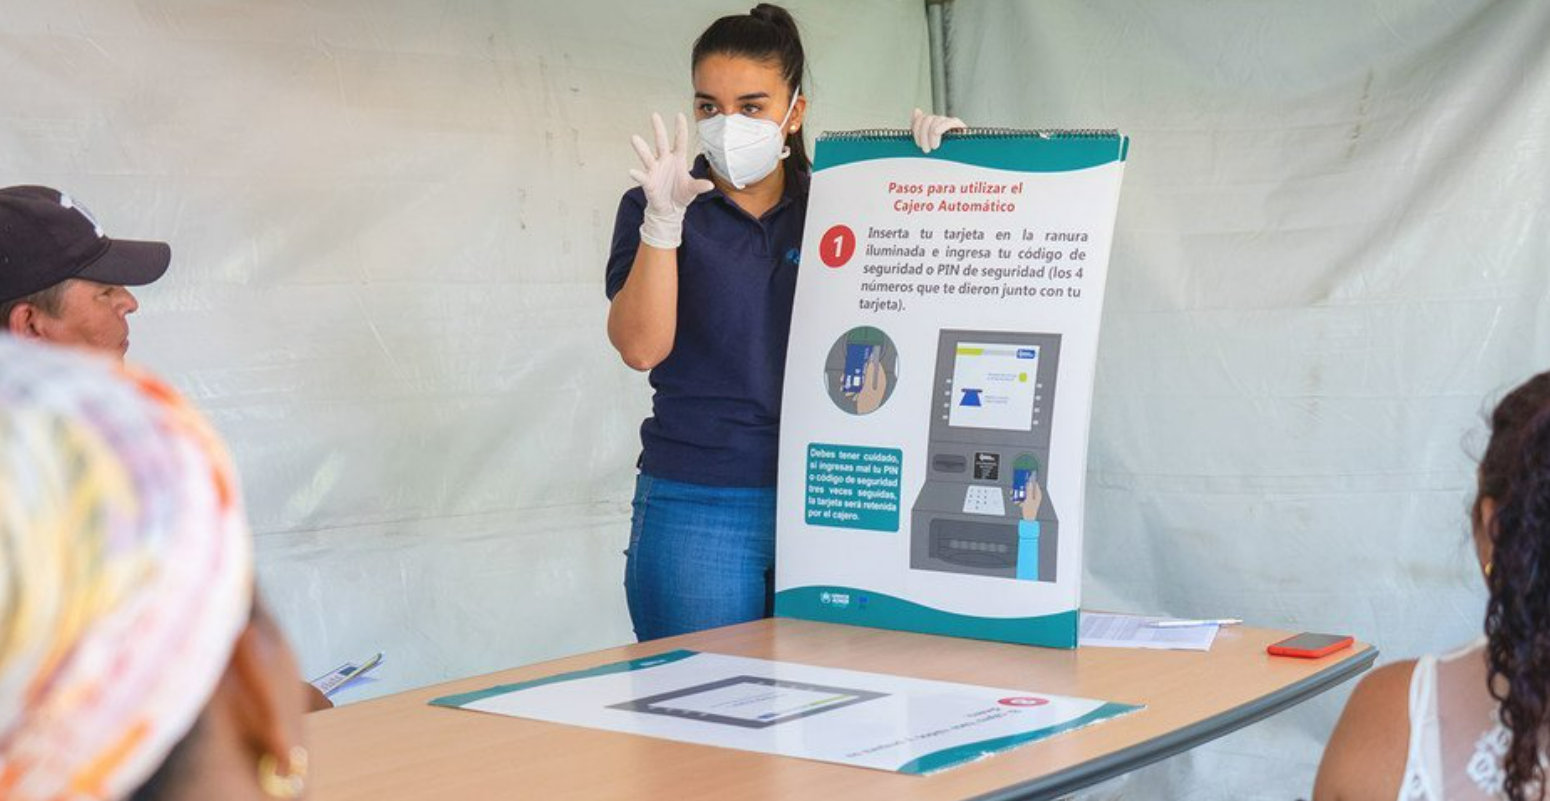 Five reasons why Costa Rica is successfully facing the coronavirus pandemic | UN News